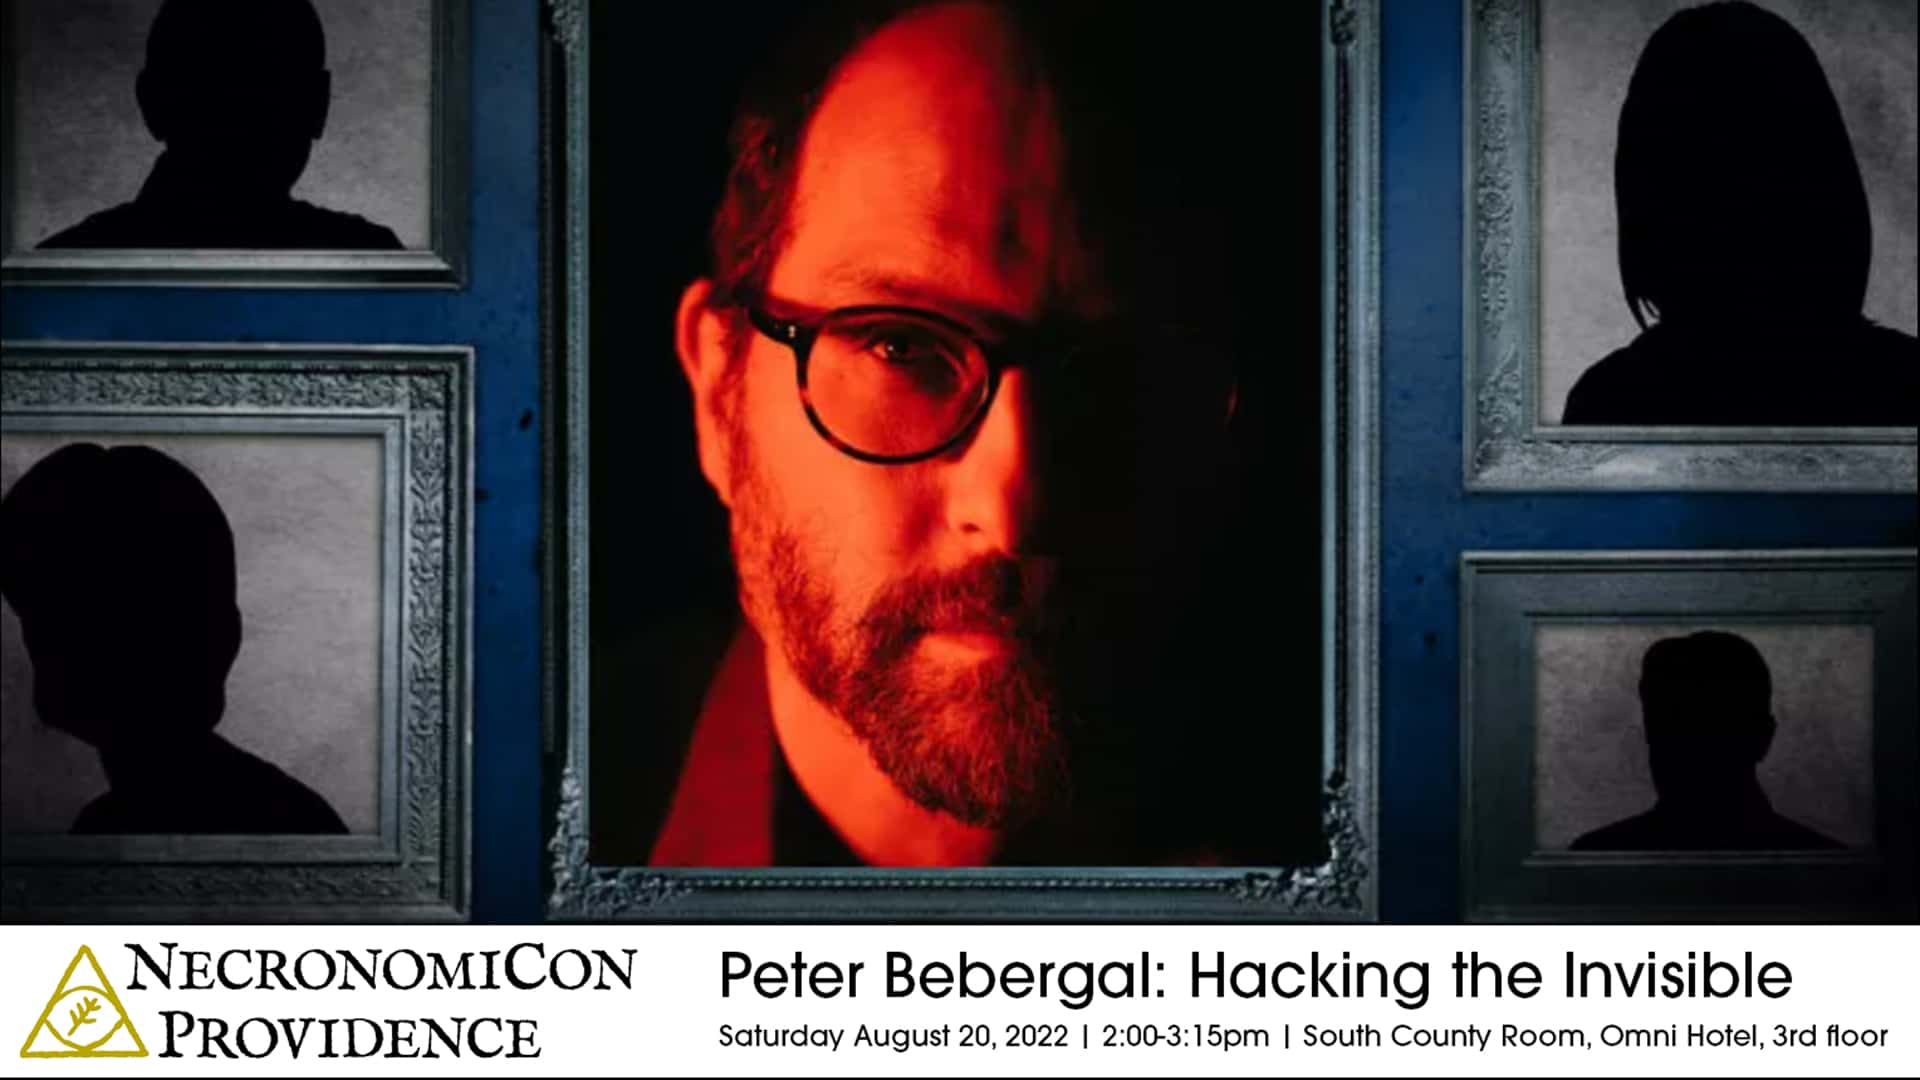 Read more about the article Peter Bebergal: Hacking the Invisible at Necronomicon Providence 2022